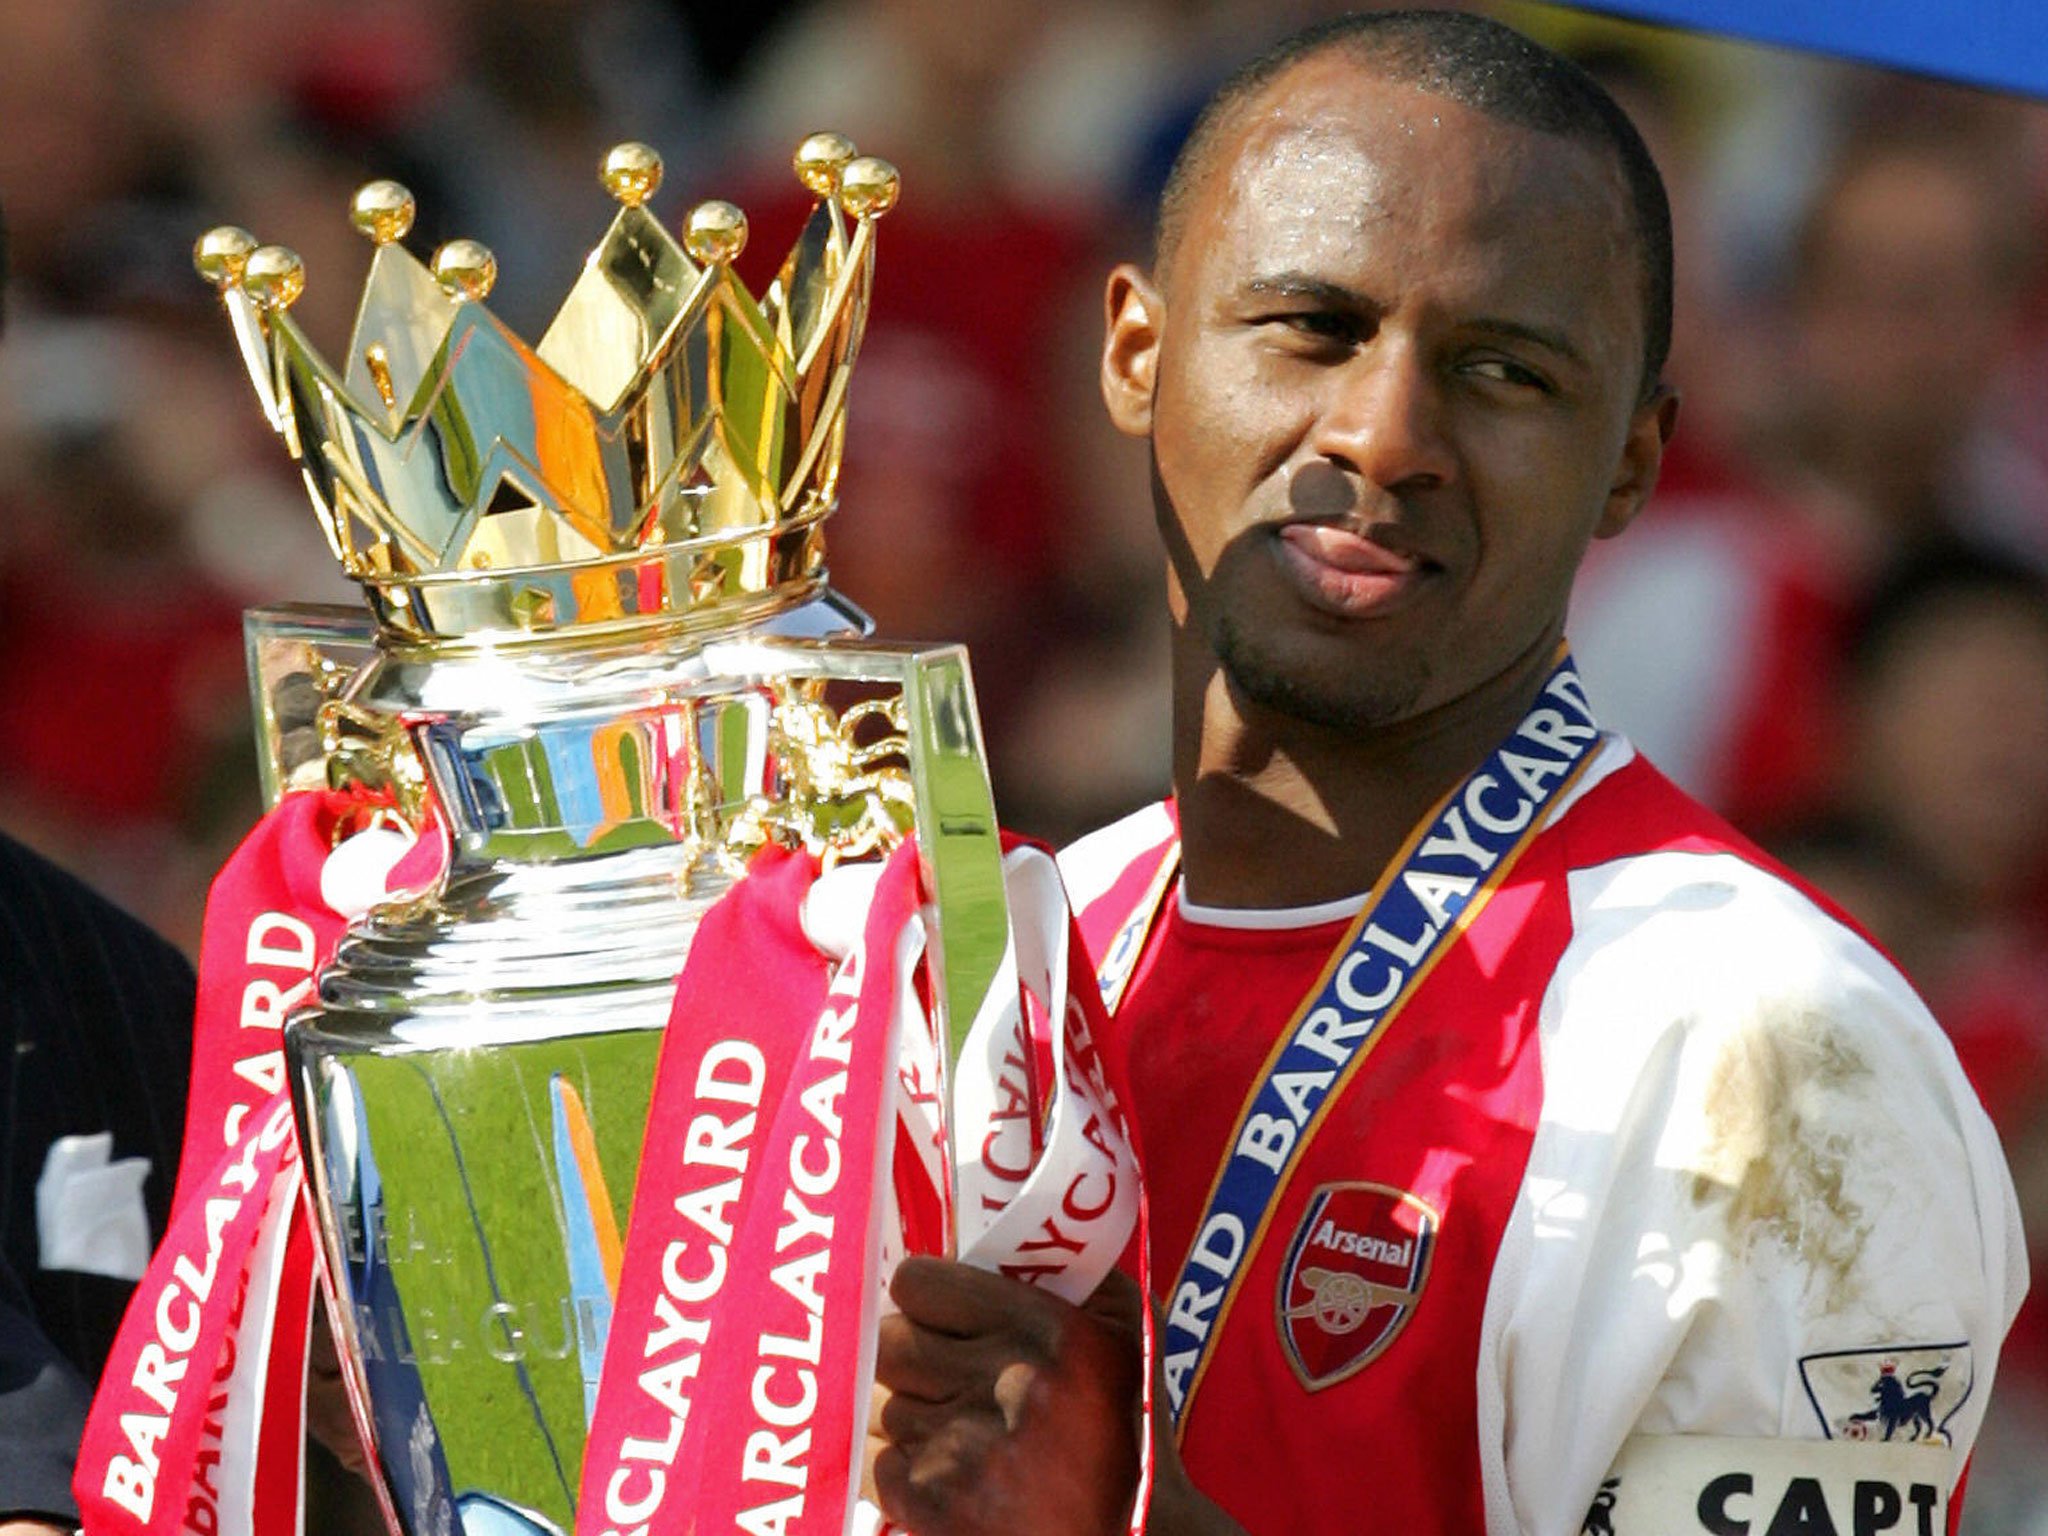 Happy birthday to Arsenal legend and Invincibles captain Patrick Vieira, who turns 41 today! 